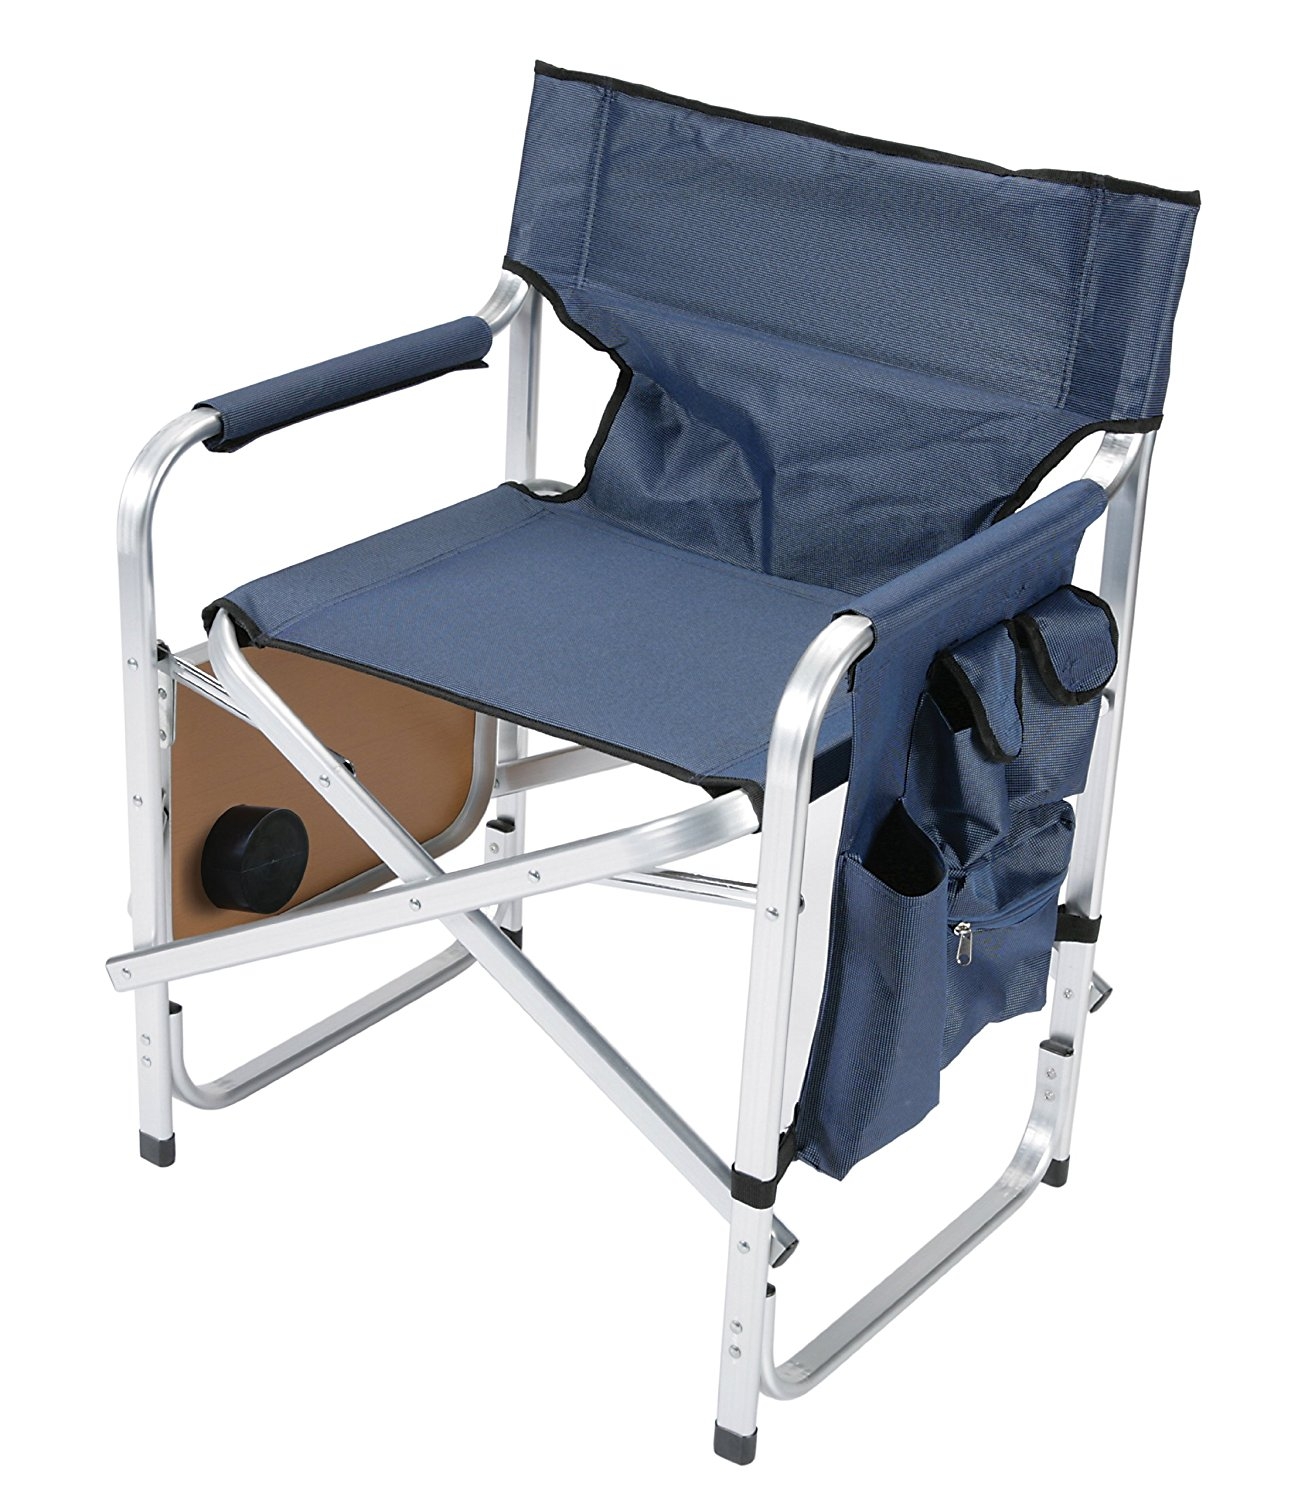 Faulkner Aluminum Director Chair with Folding Tray and Cup Holder, Blue